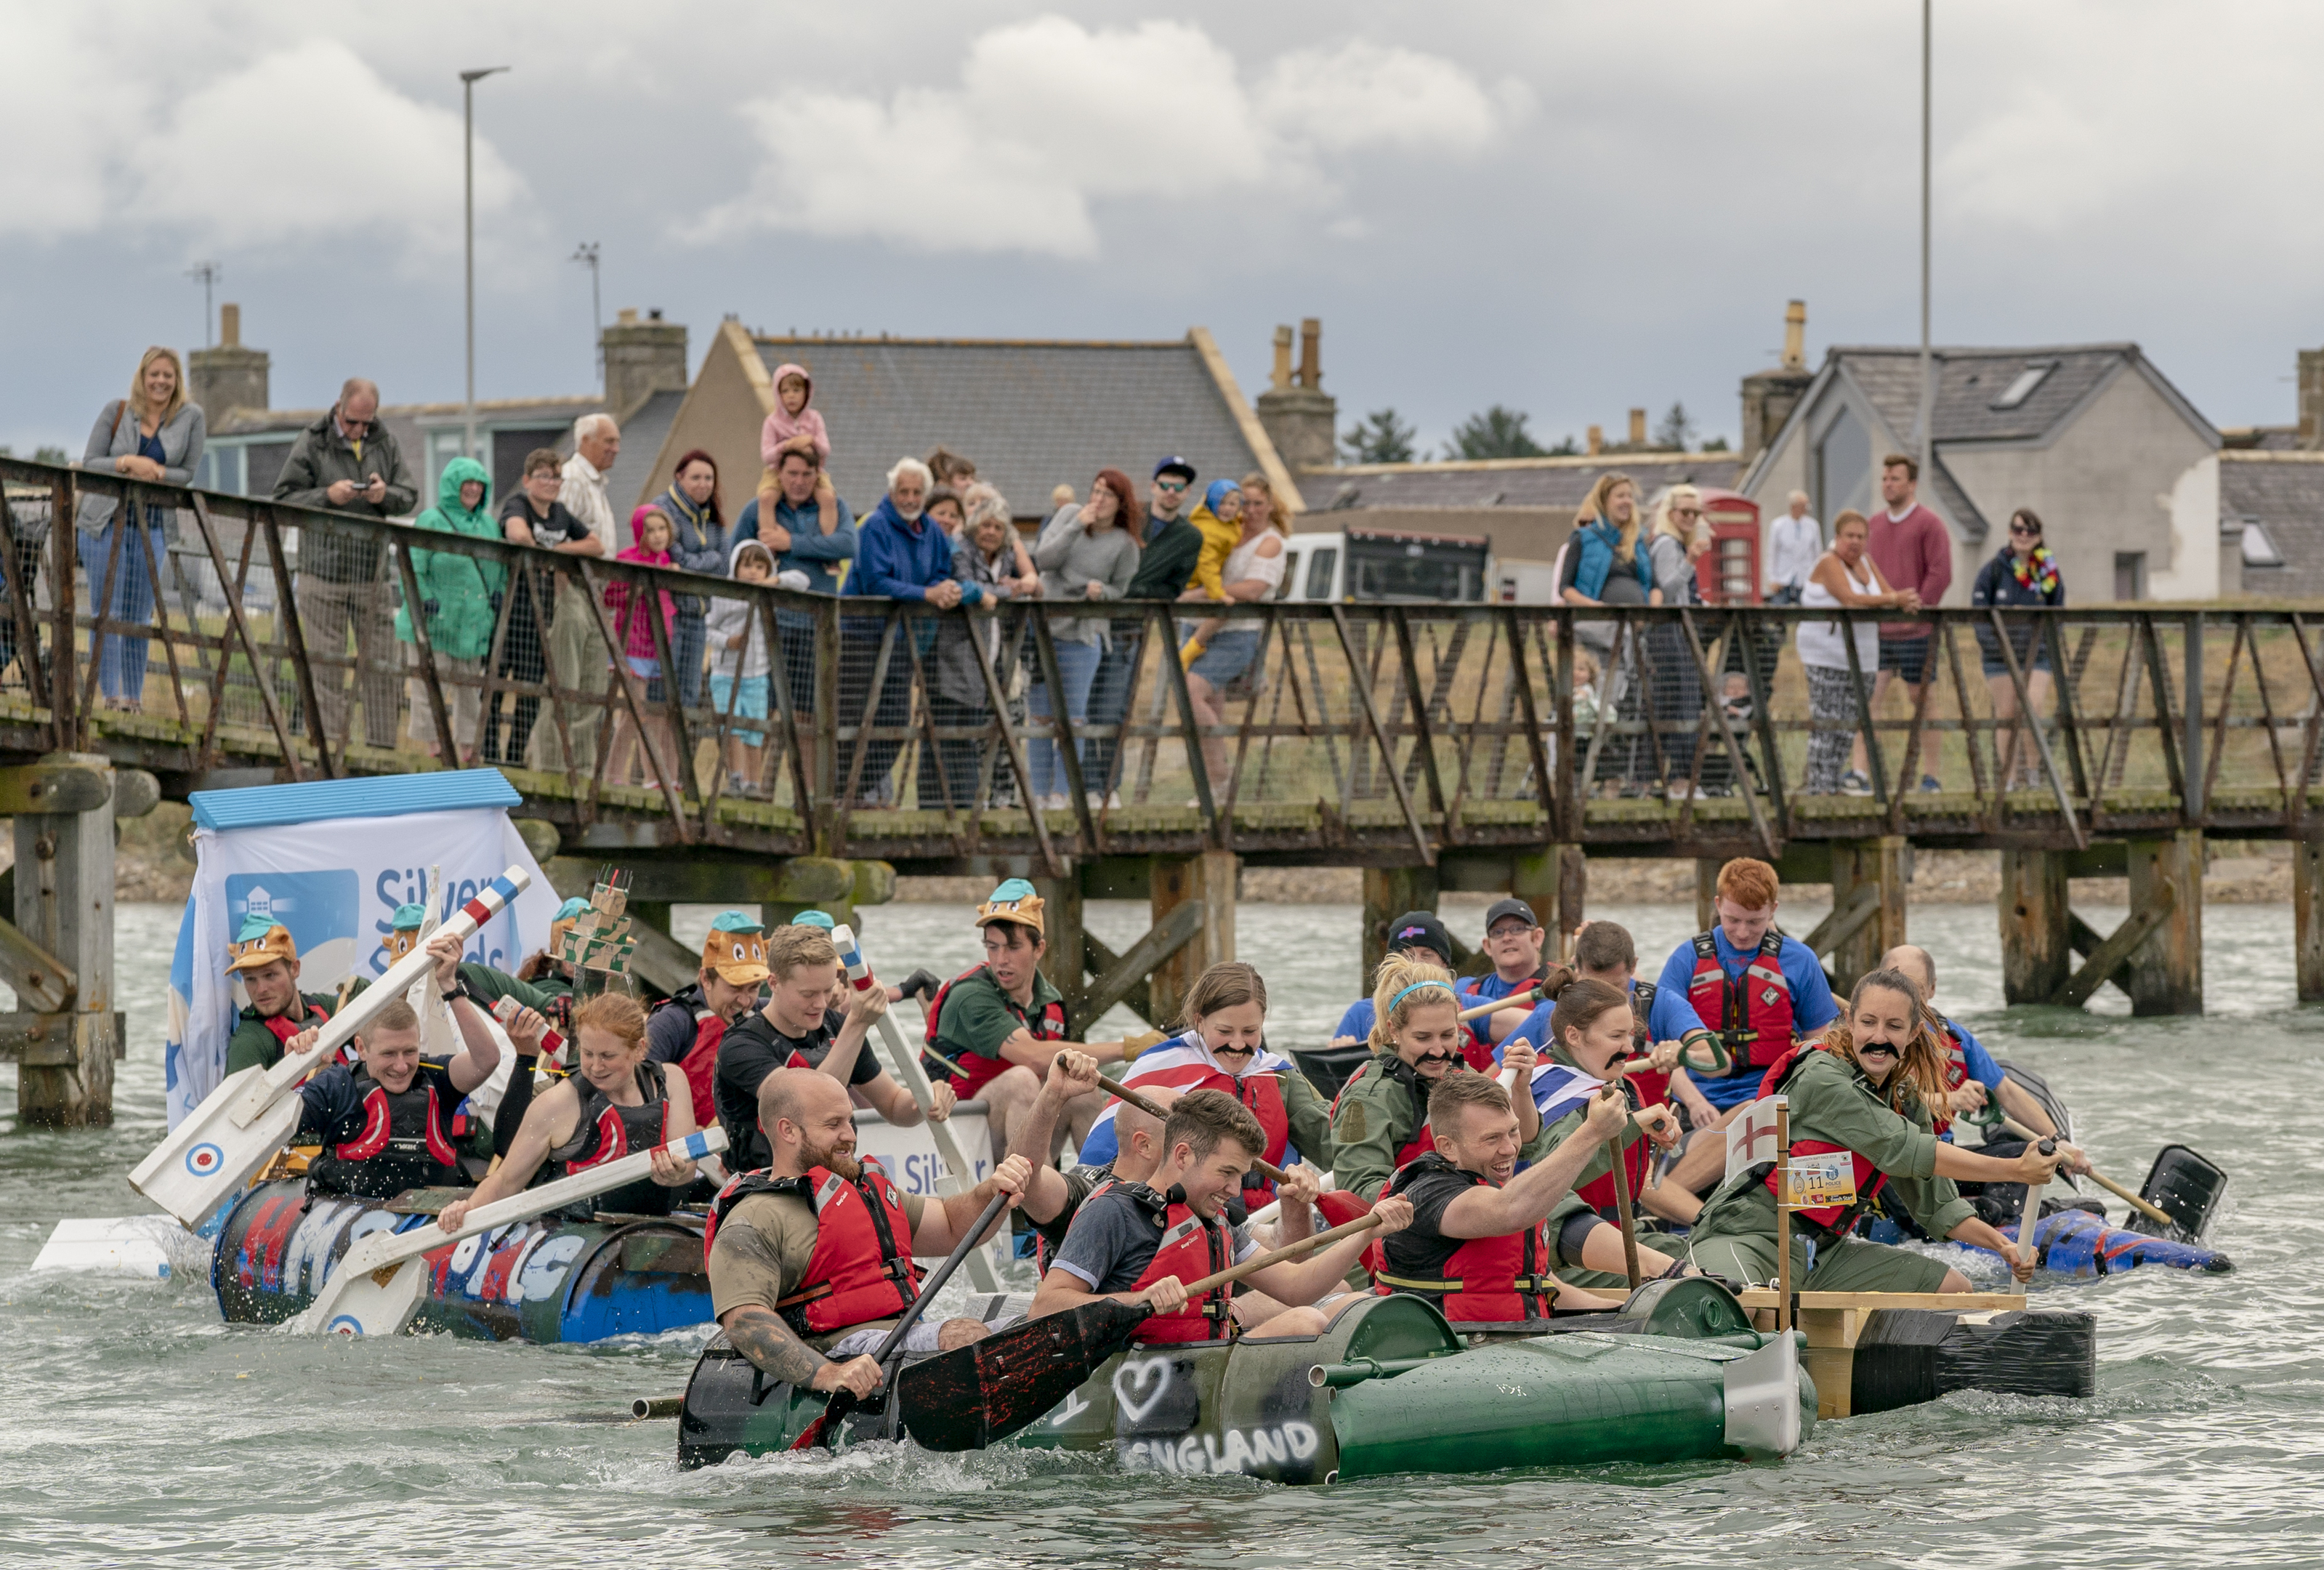 Teams were invited to design their rafts to celebrate the RAF's centenary.